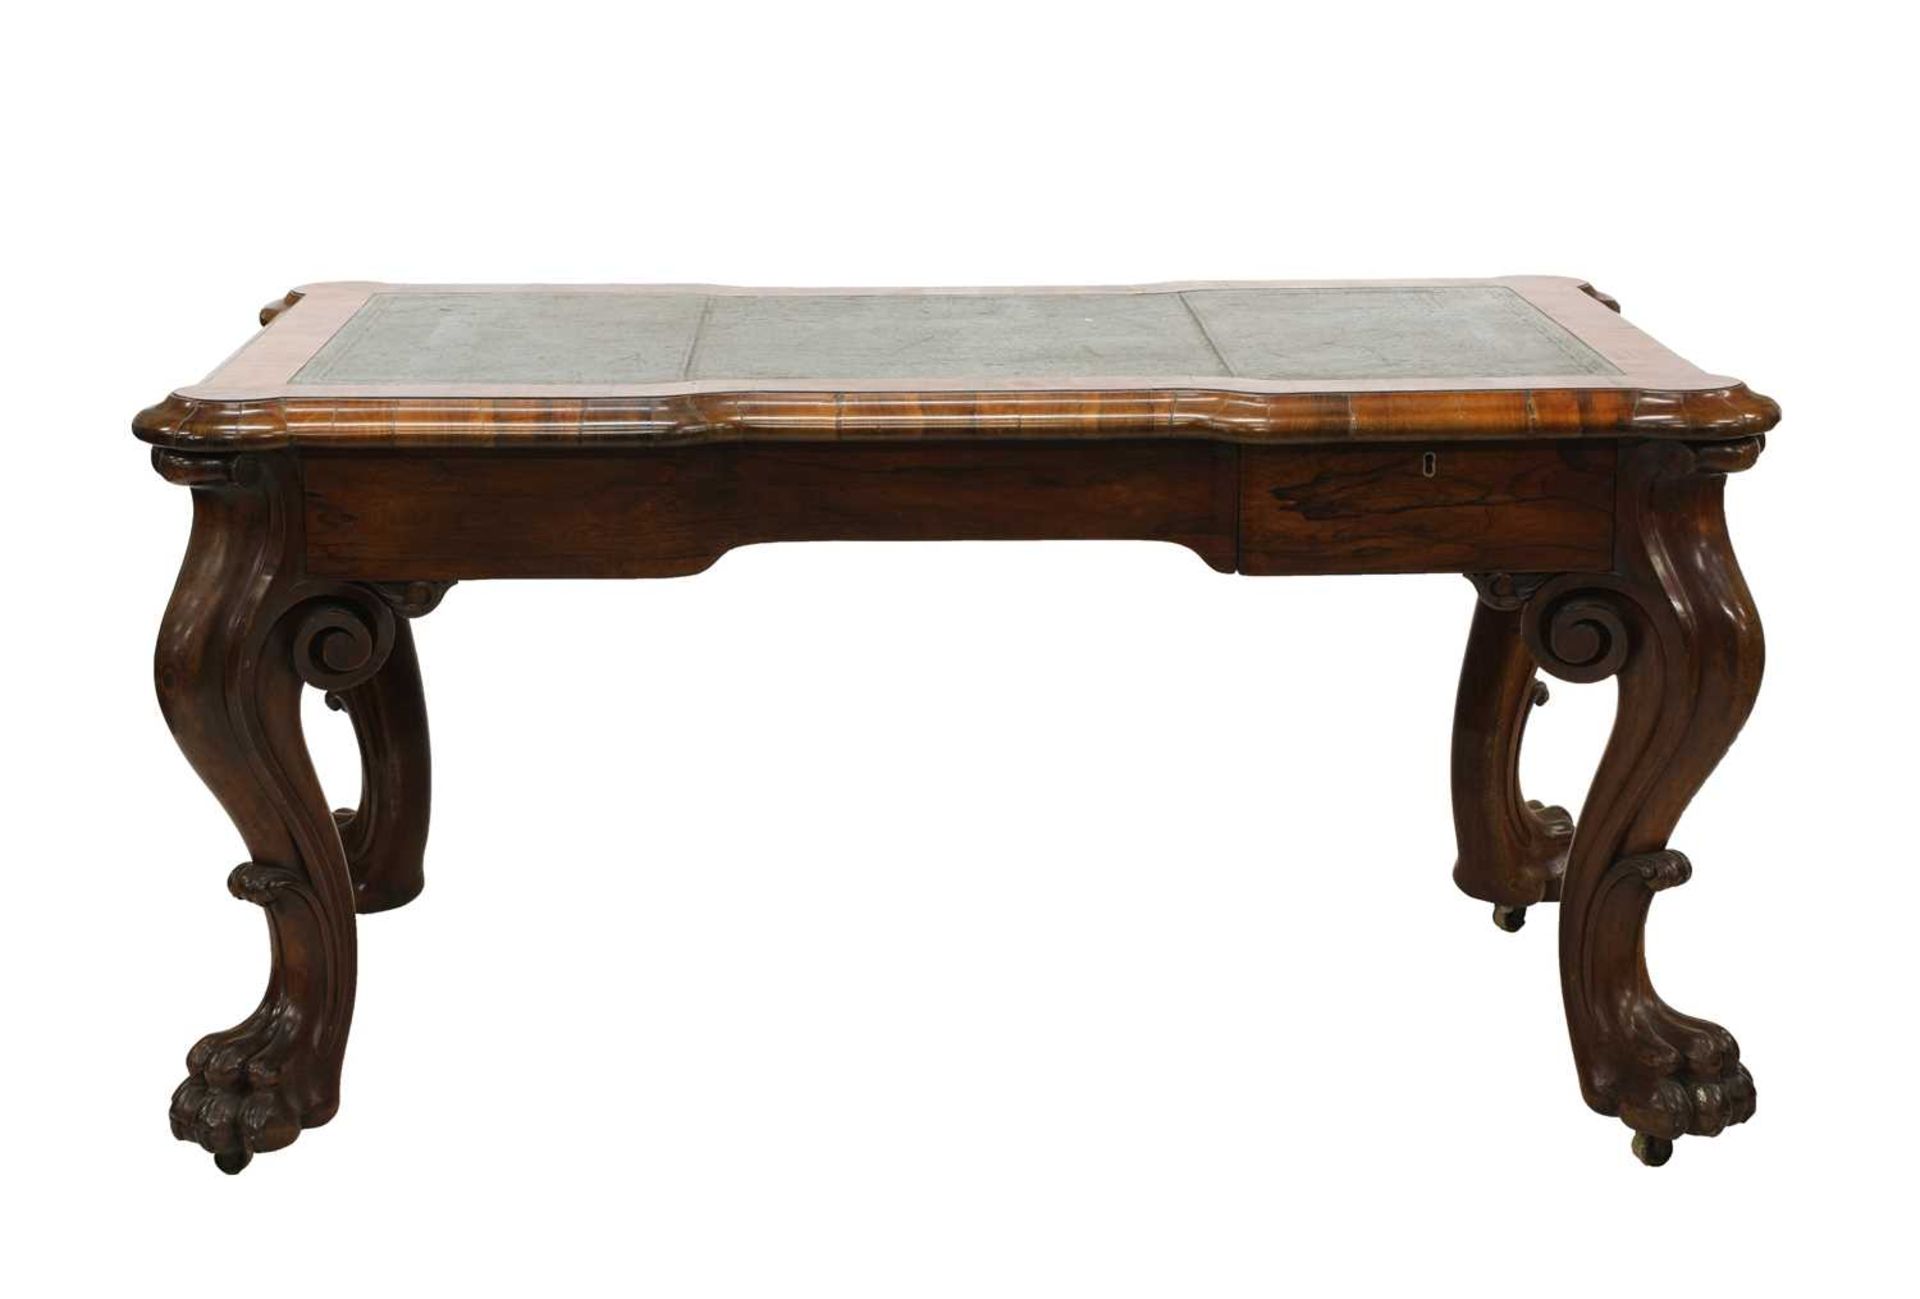 A goncalo alves library table, - Image 6 of 7